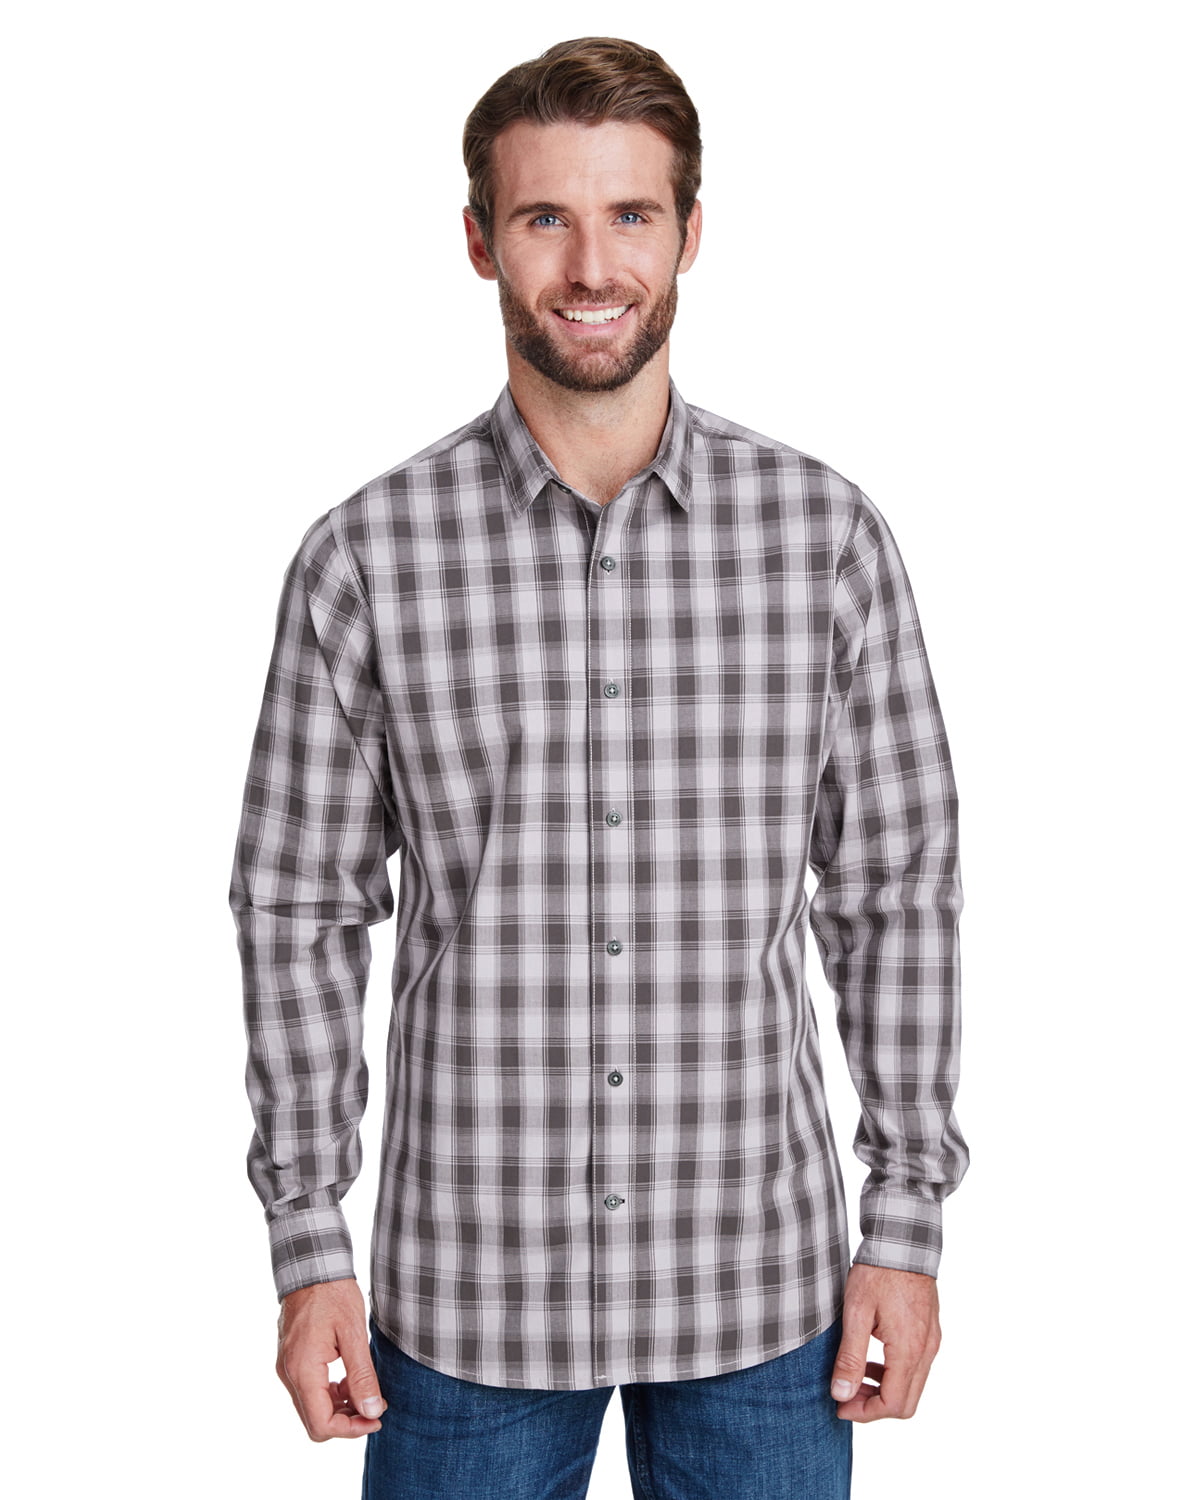 Artisan Collection by Reprime Mens Microcheck Gingham Long-Sleeve Cotton Shirt 